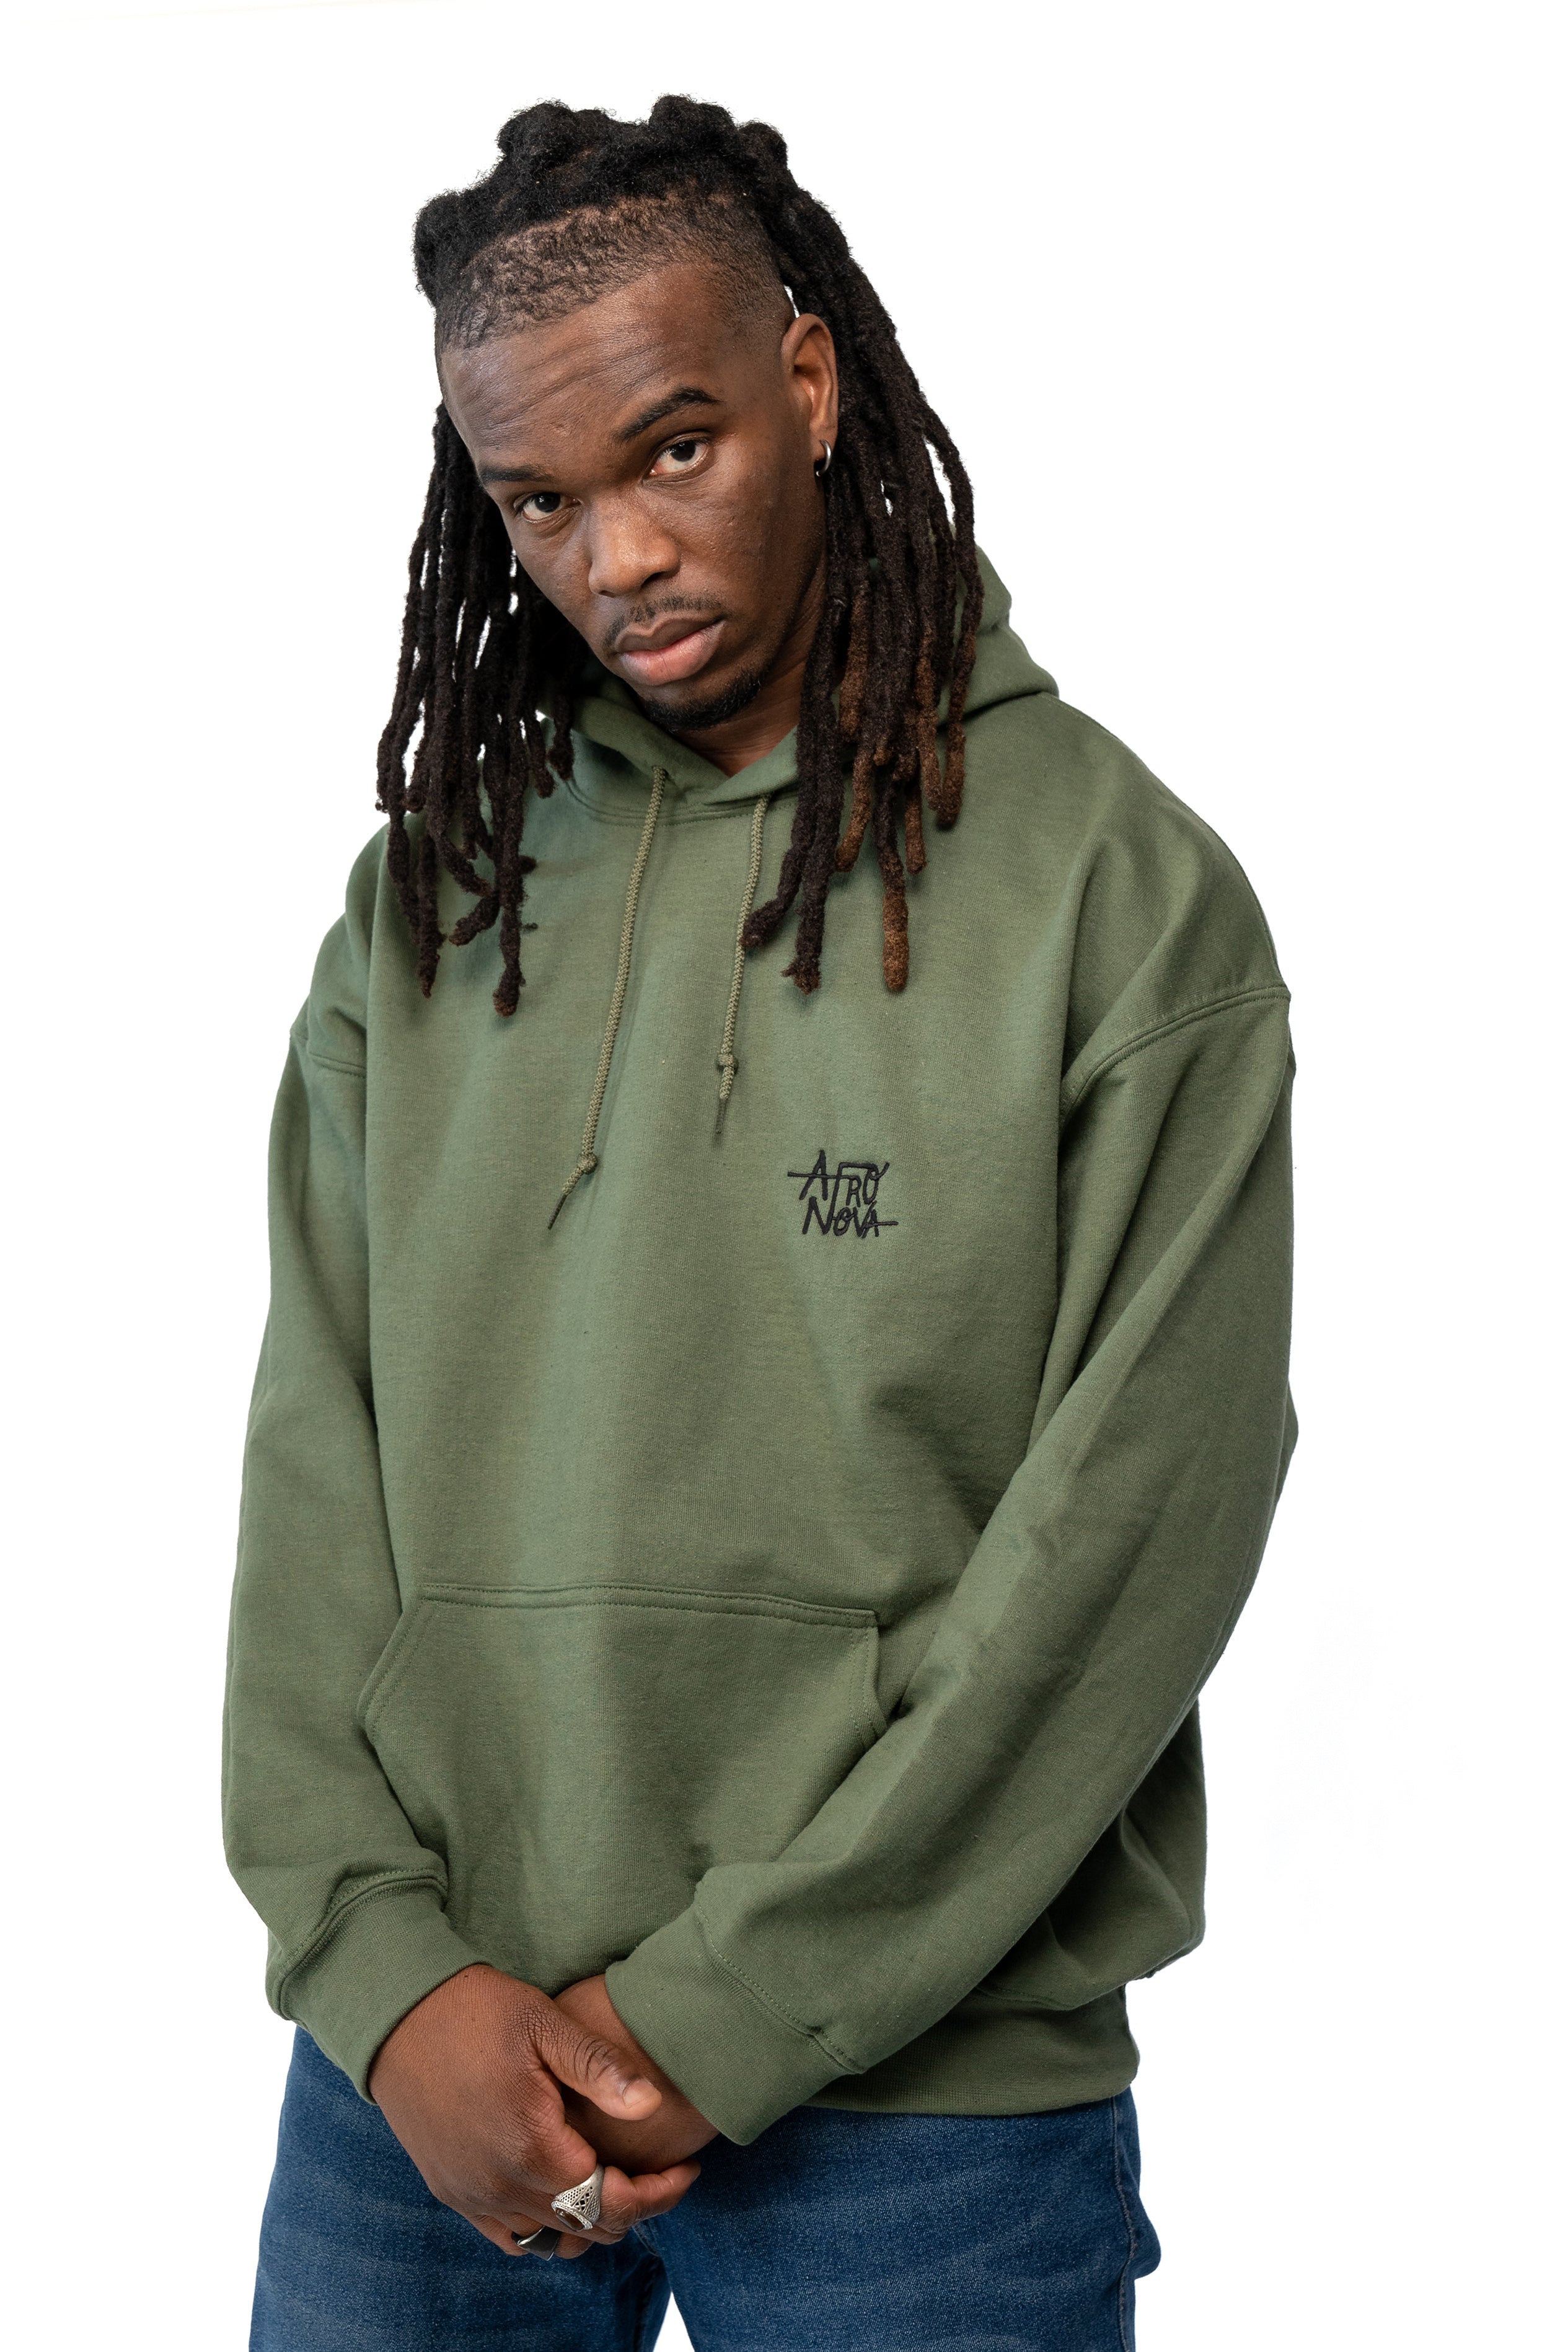 Man with dreadlocks wearing an olive or military green hoodie